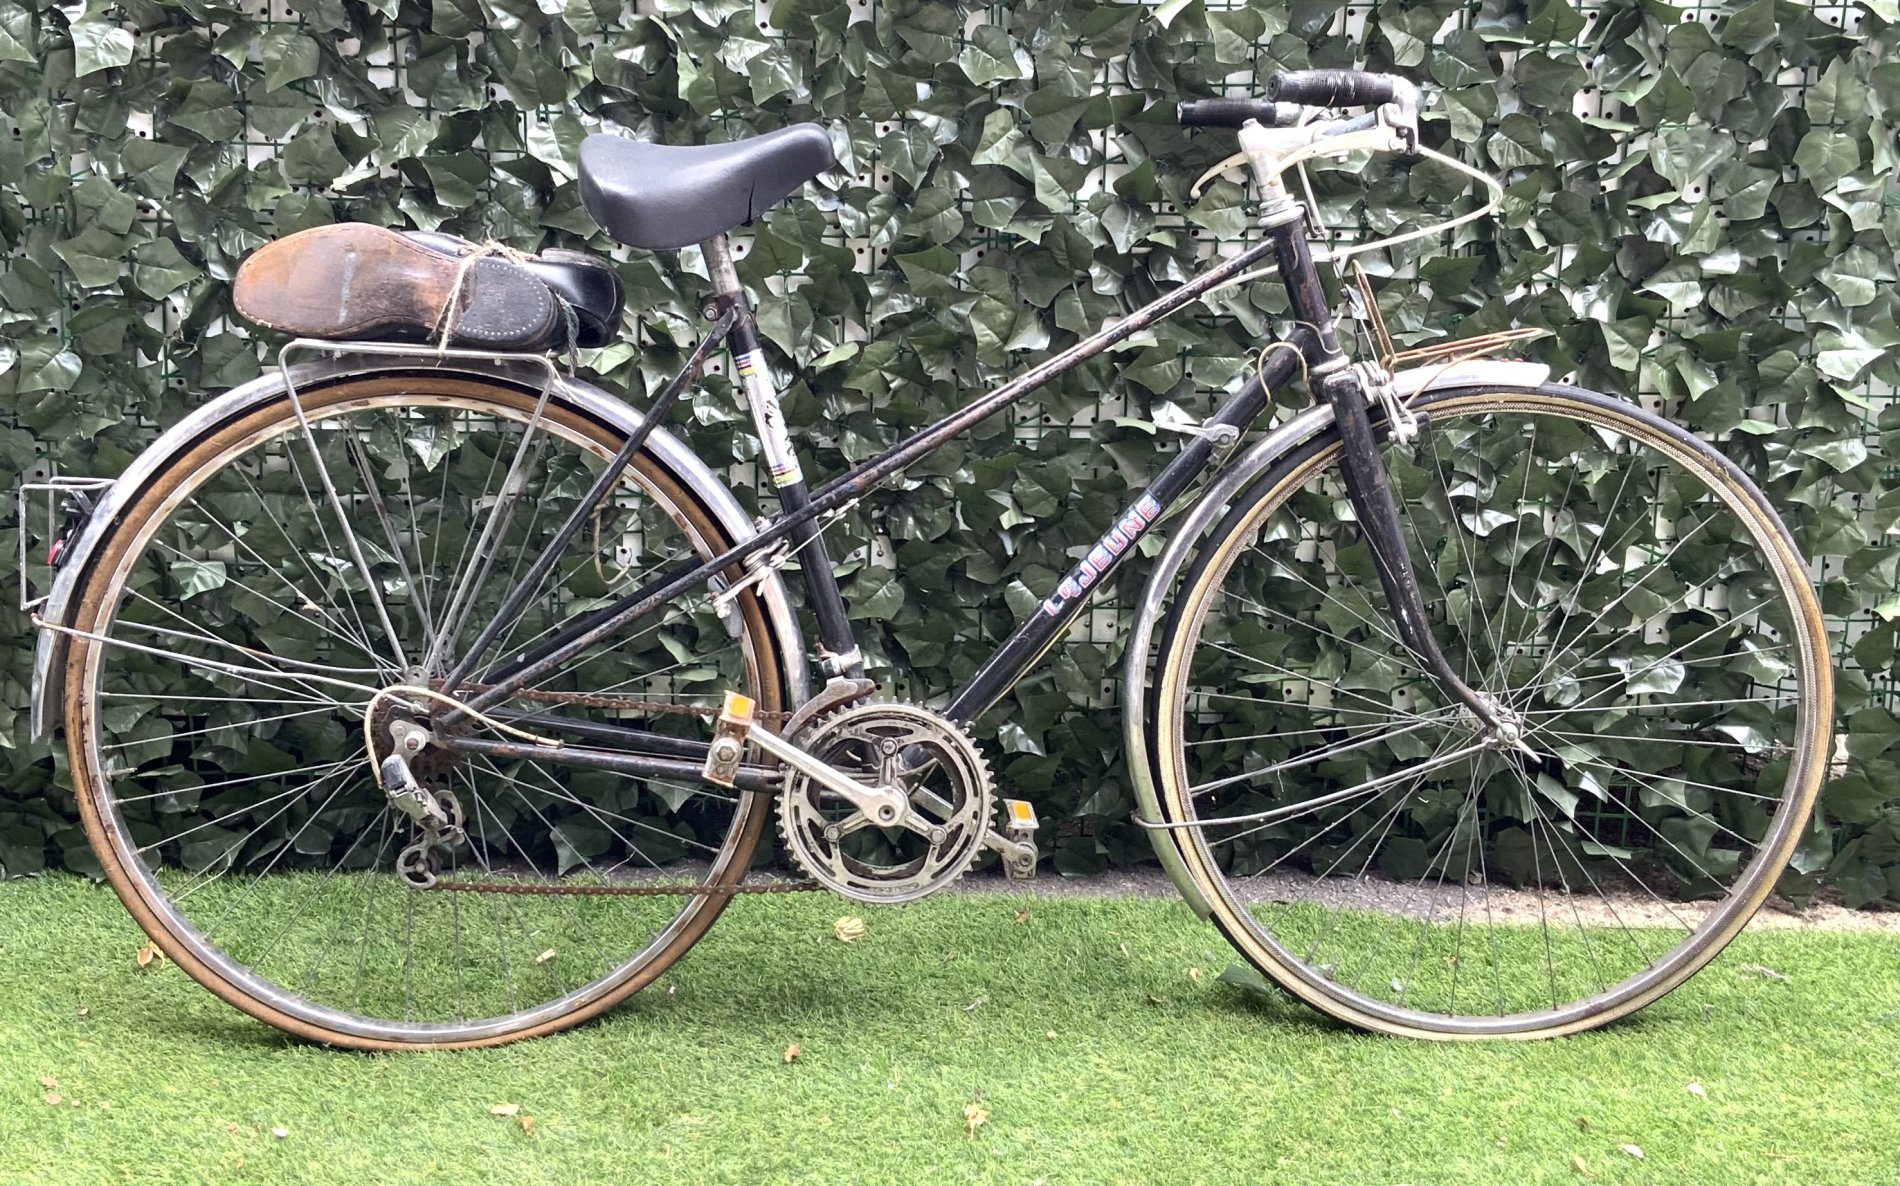 A MID 20TH CENTURY LEJEUNE BICYCLE, TOGETHER WITH VINTAGE CYCLING SHOES.